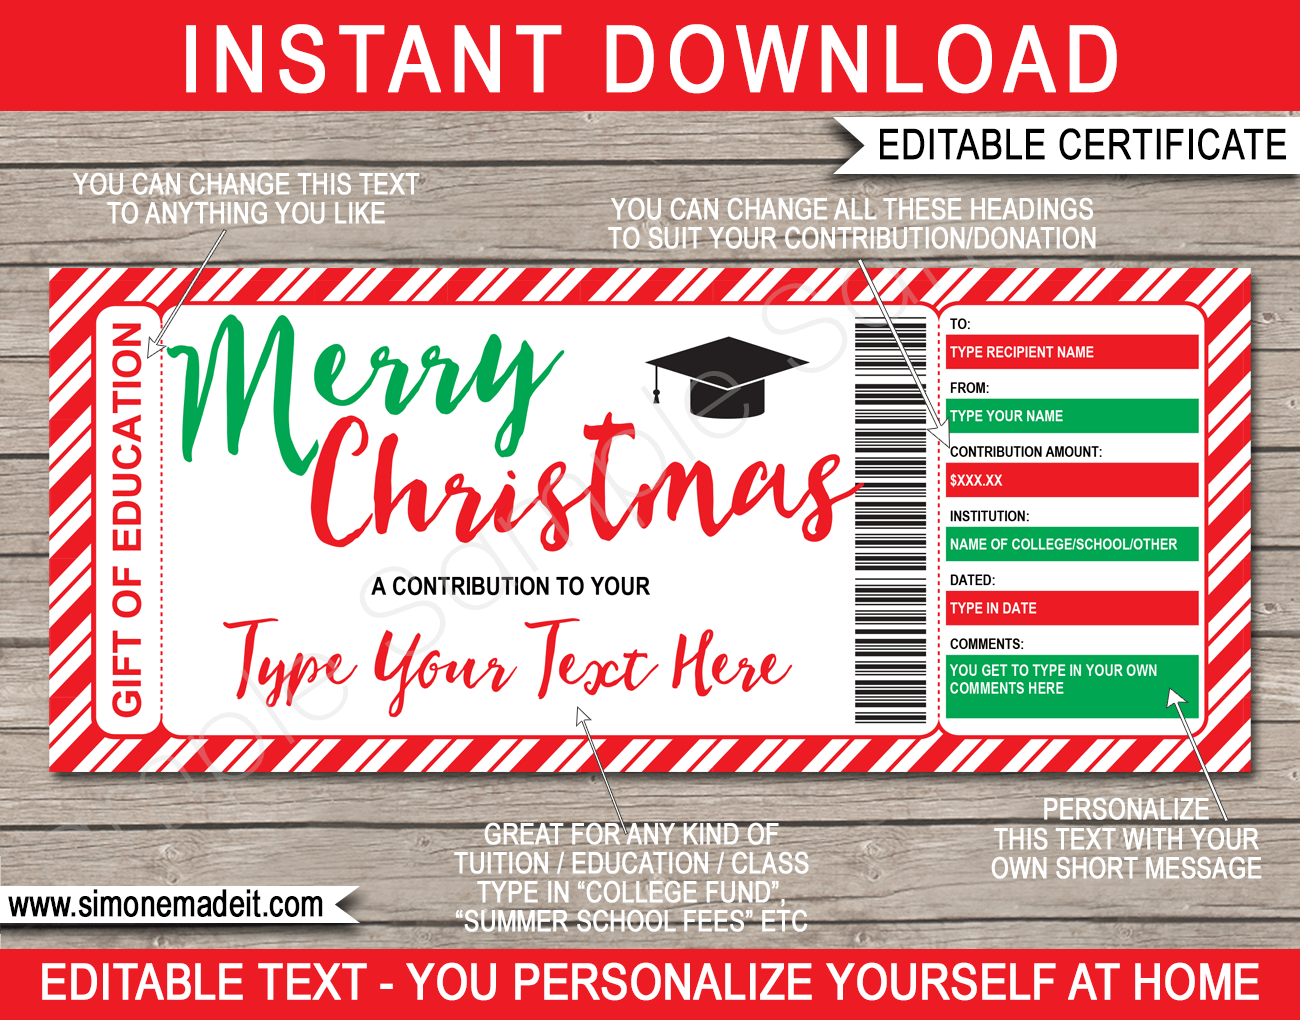 Christmas Education Gift Certificate Template  School Fees With Free Christmas Gift Certificate Templates